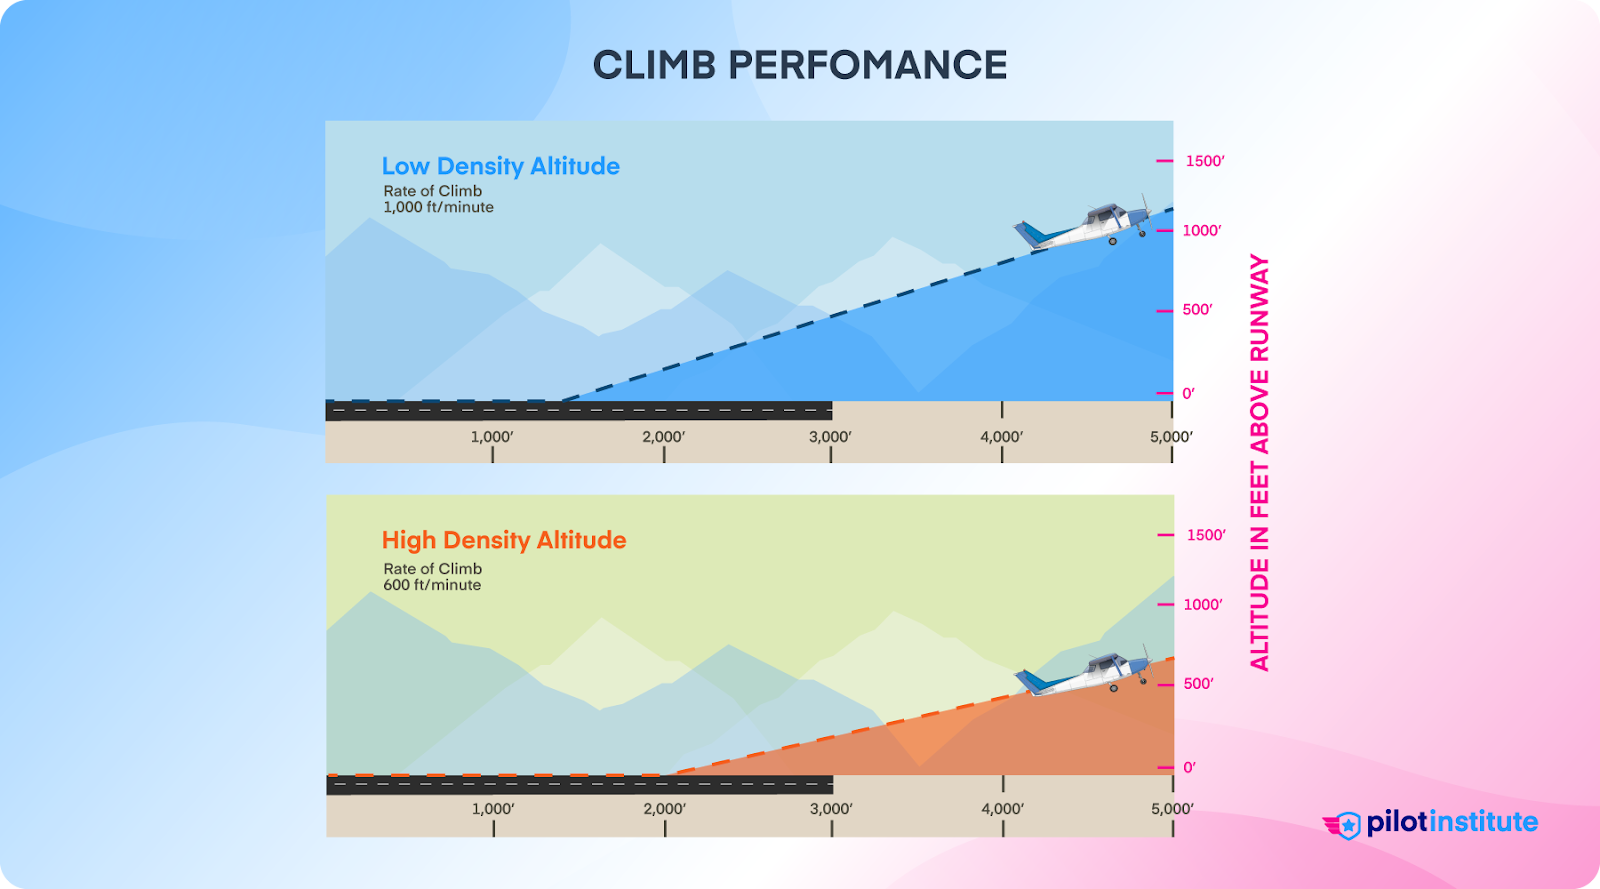 Climb performance decreases for airplanes at high density altitudes.